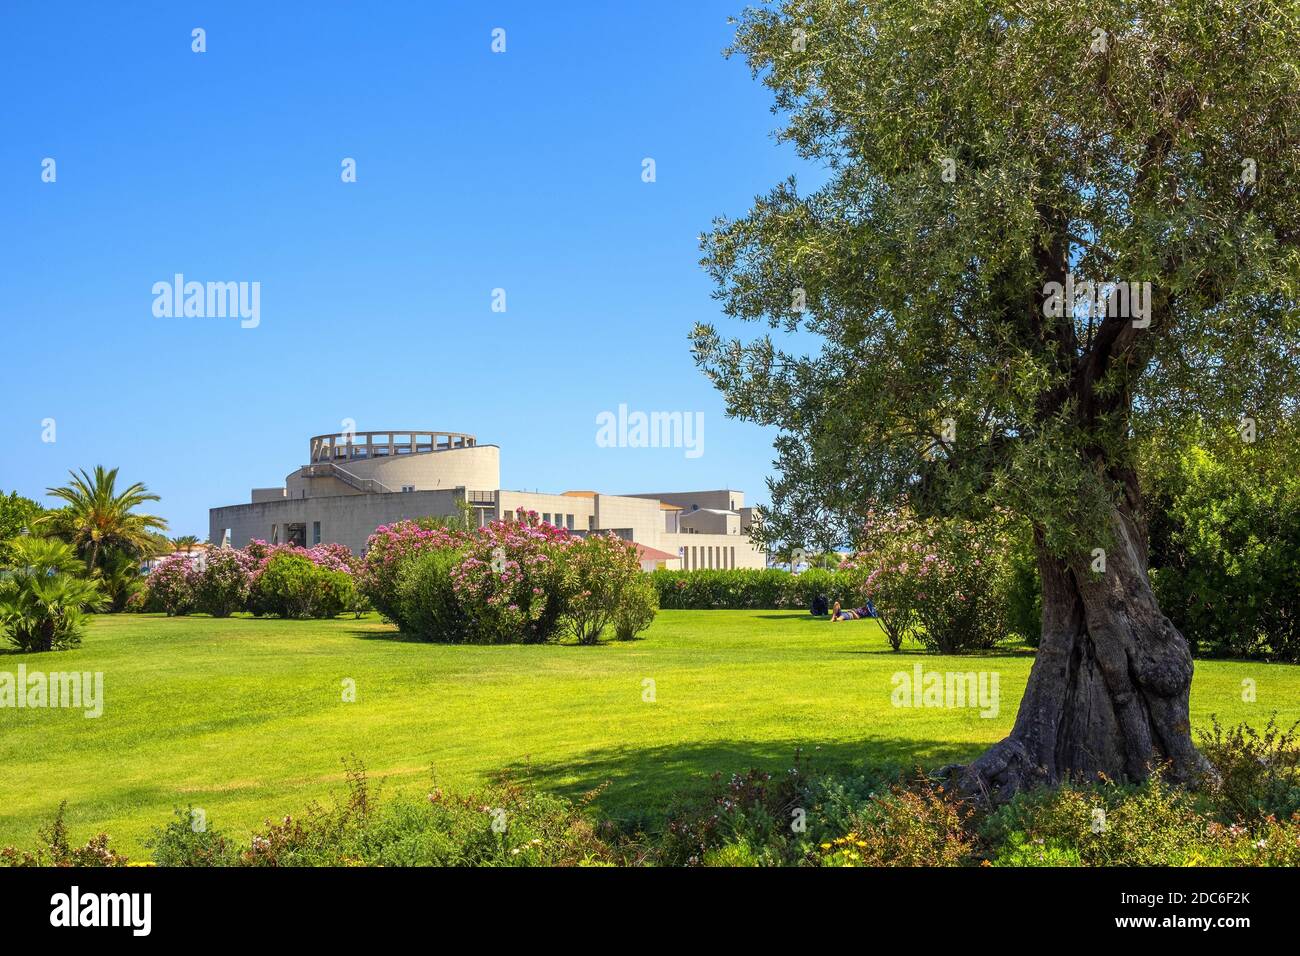 Olbia, Sardinia / Italy - 2019/07/21: Panoramic view of the Archeological Museum of Olbia - Museo Archeologico - on Gulf of Olbia island at the port a Stock Photo